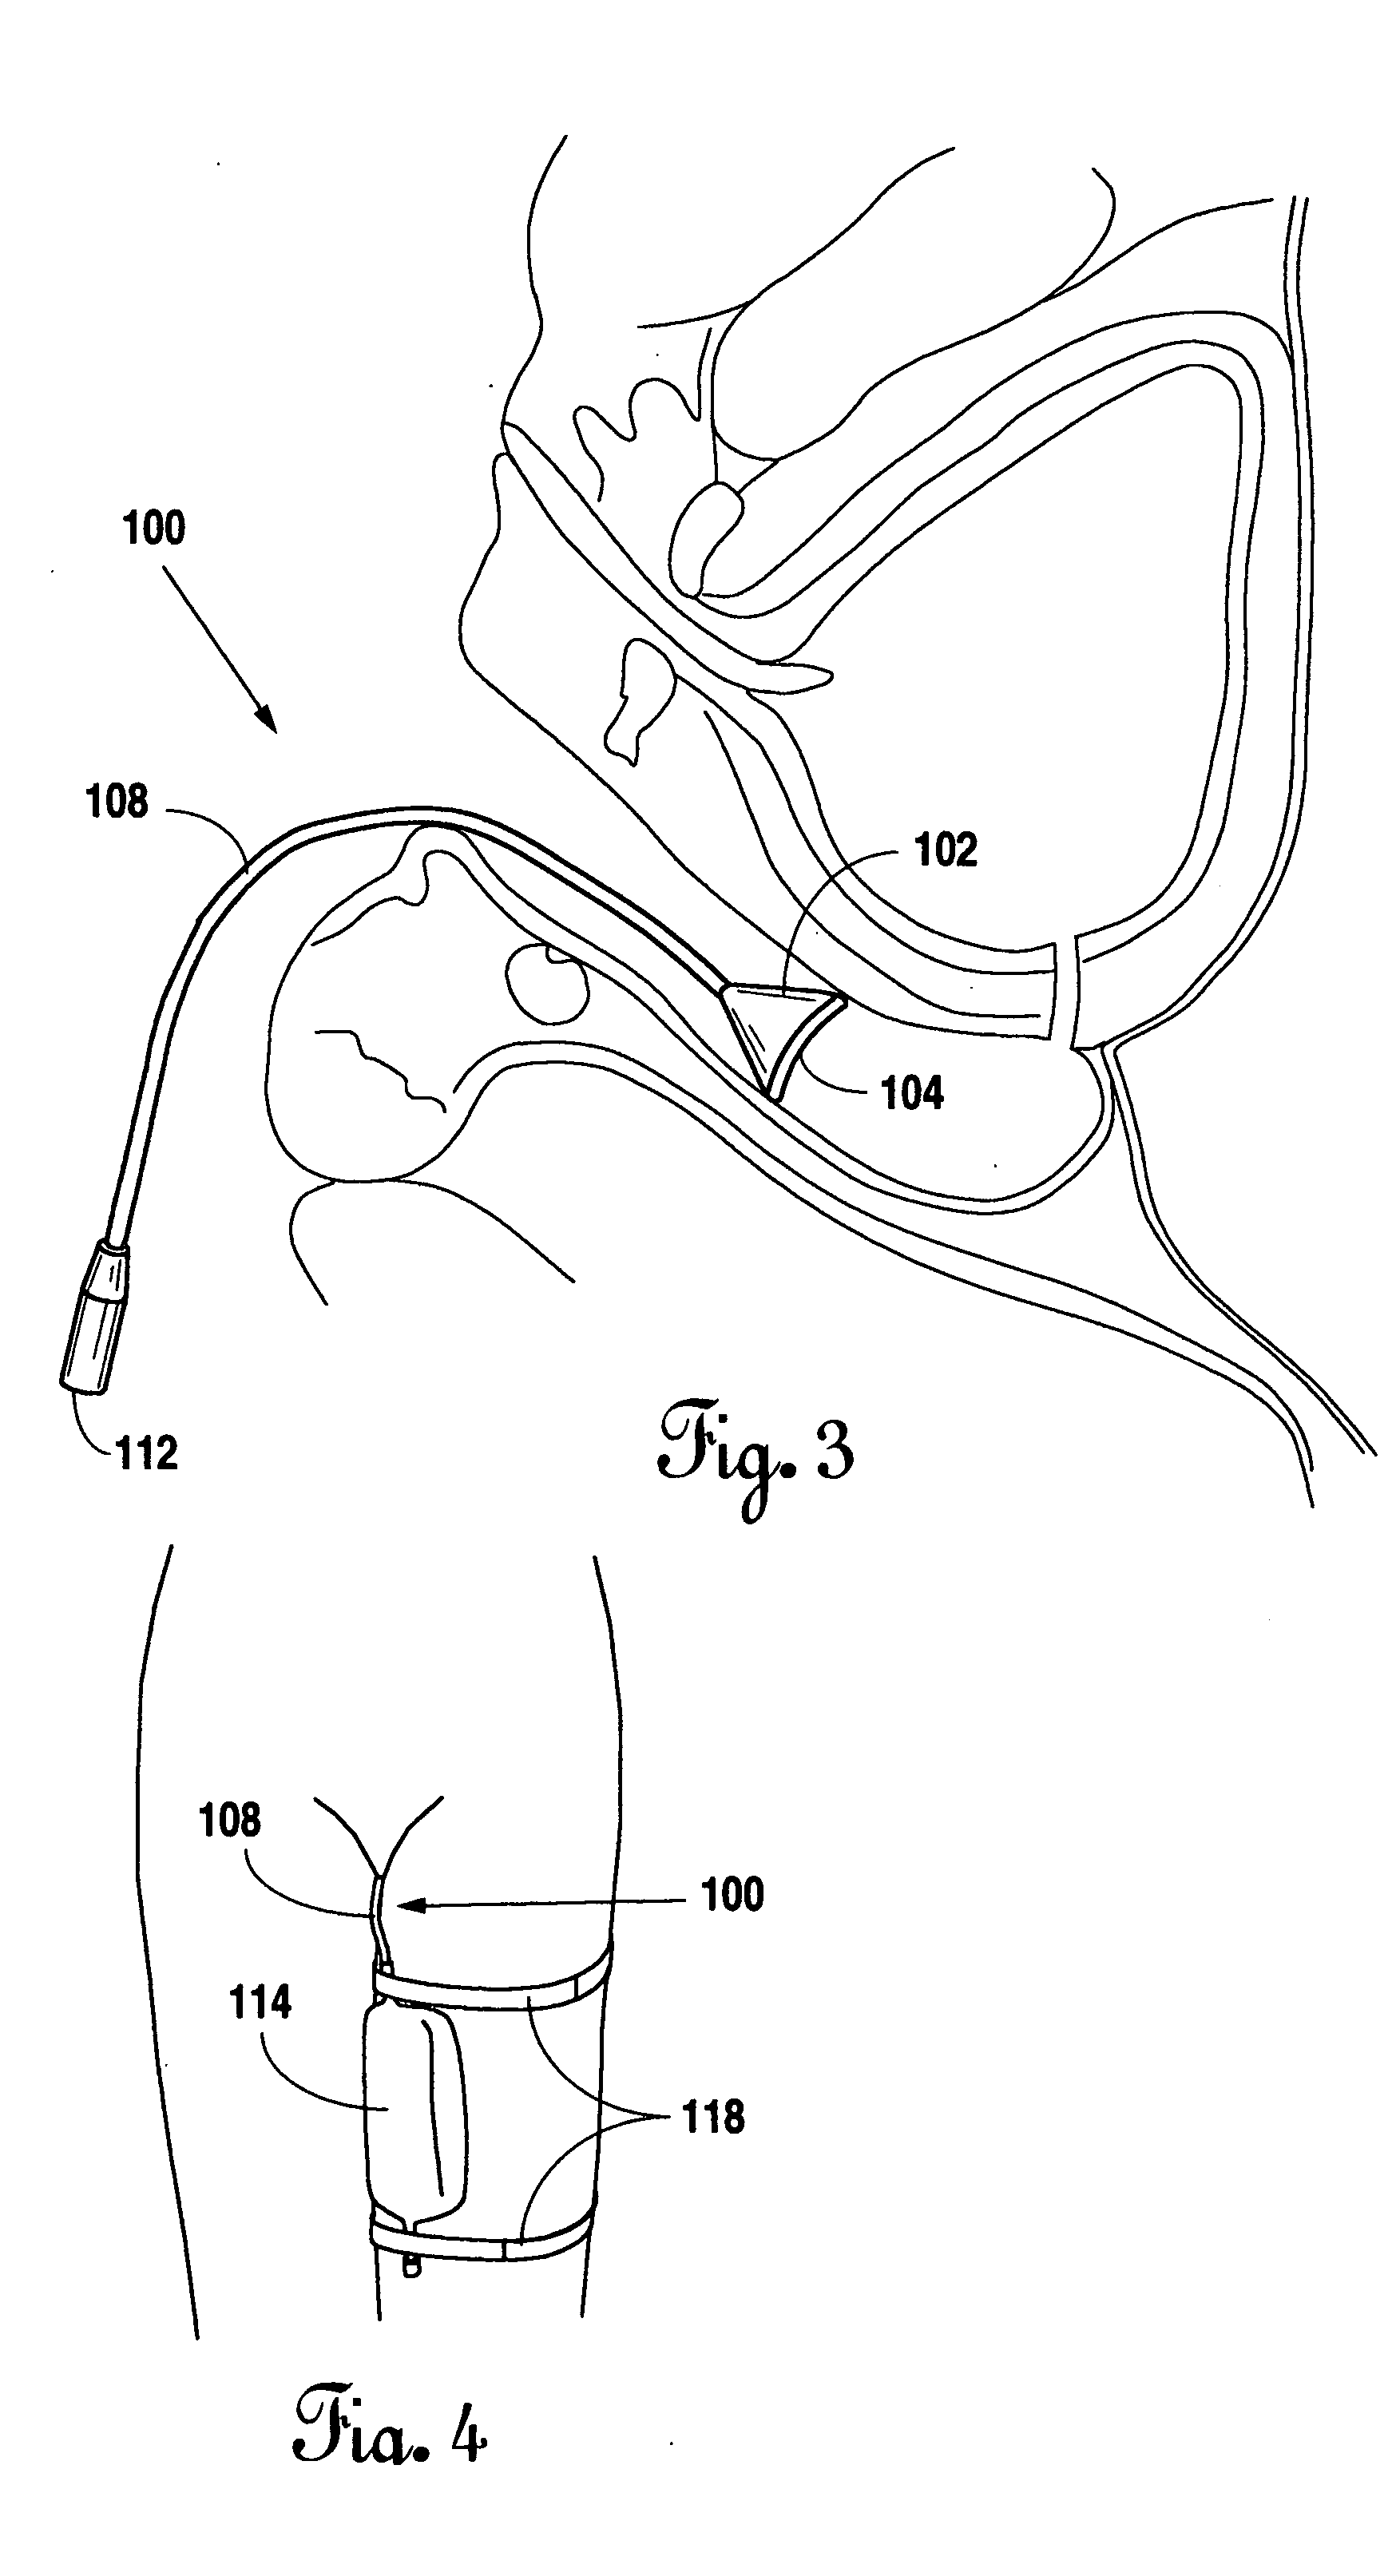 Vesicovaginal incontinence device and method of use